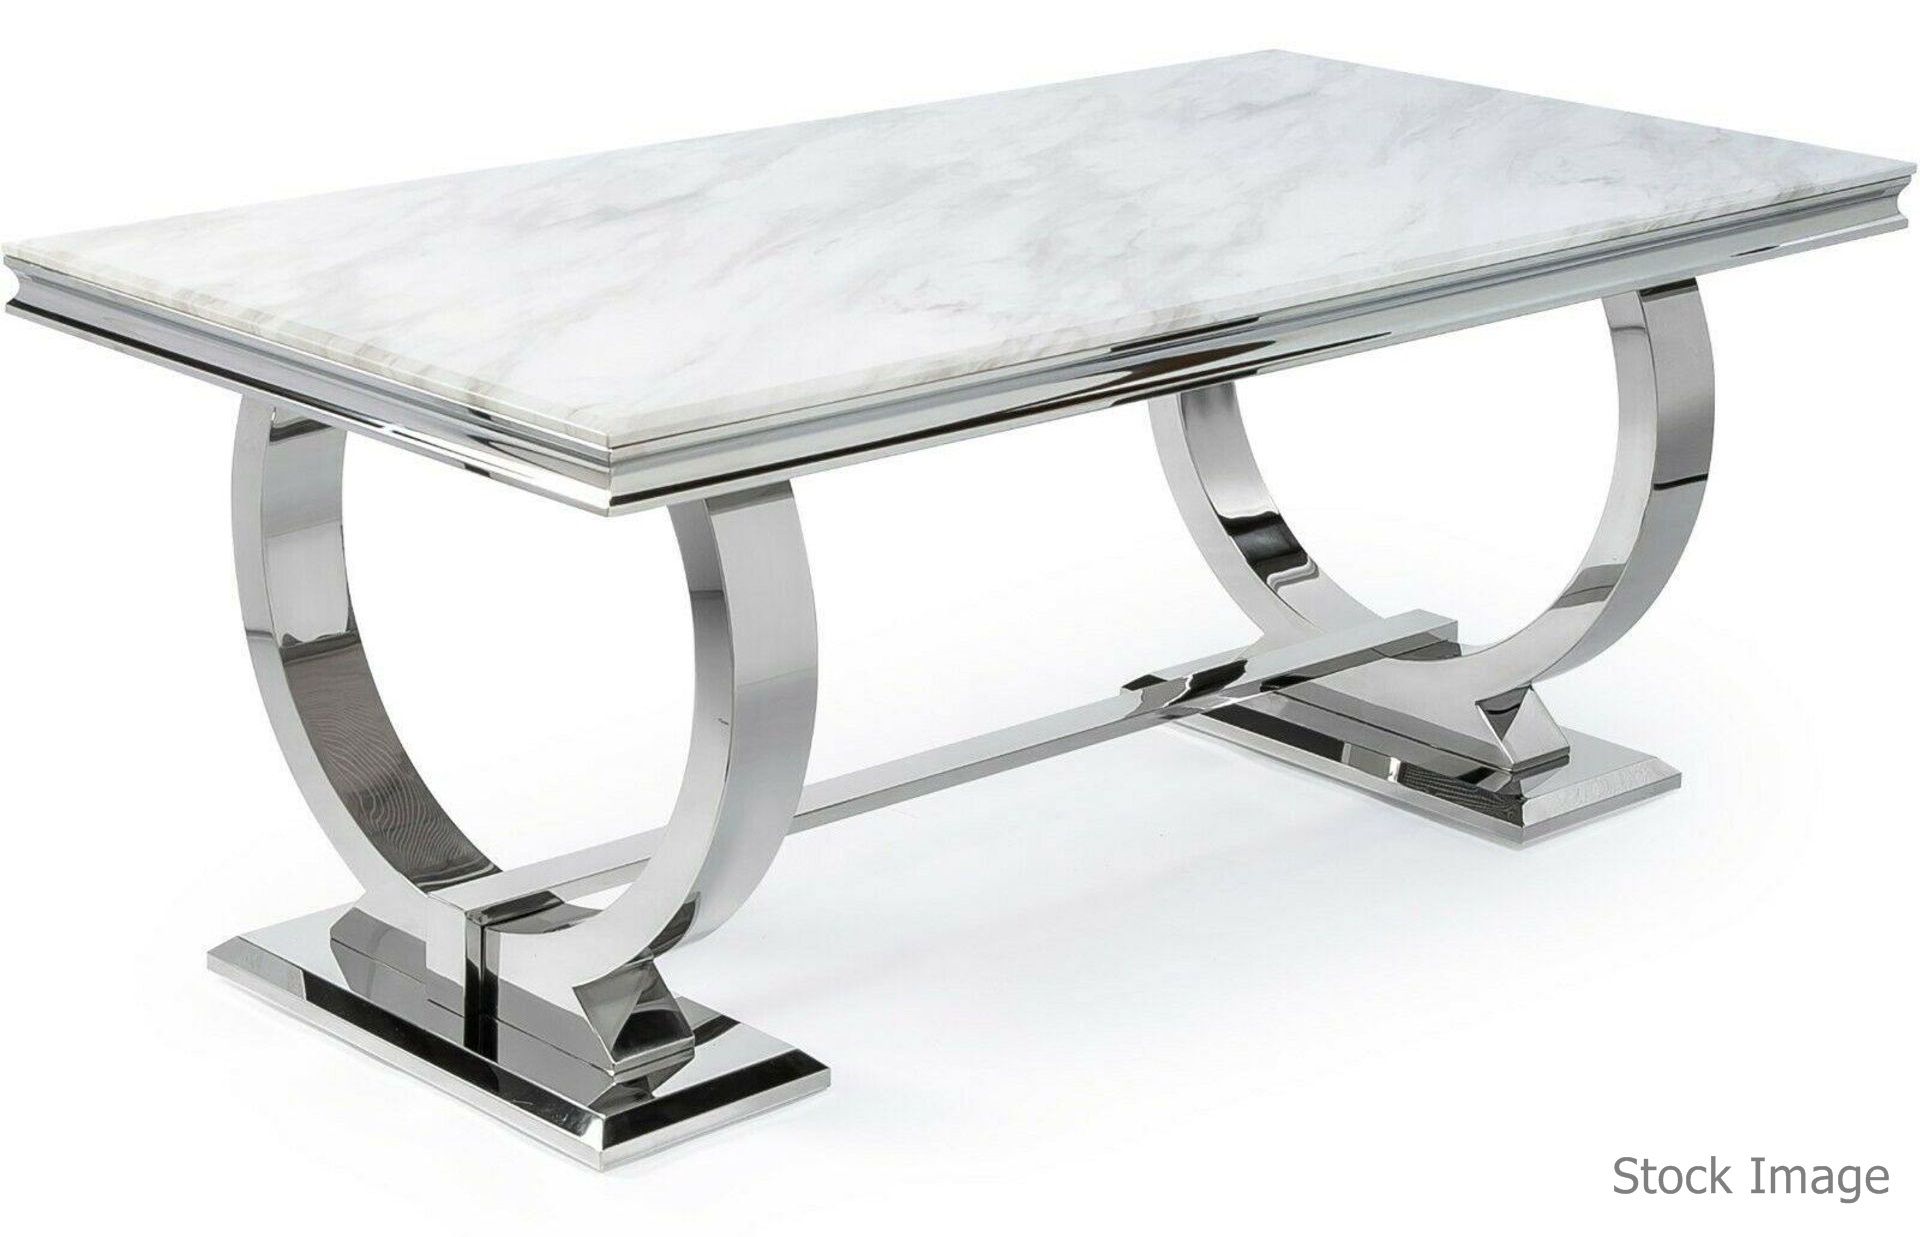 1 x Arianna 2-Metre Long Dining Table With Marble Top With A Chrome Base - Image 2 of 12